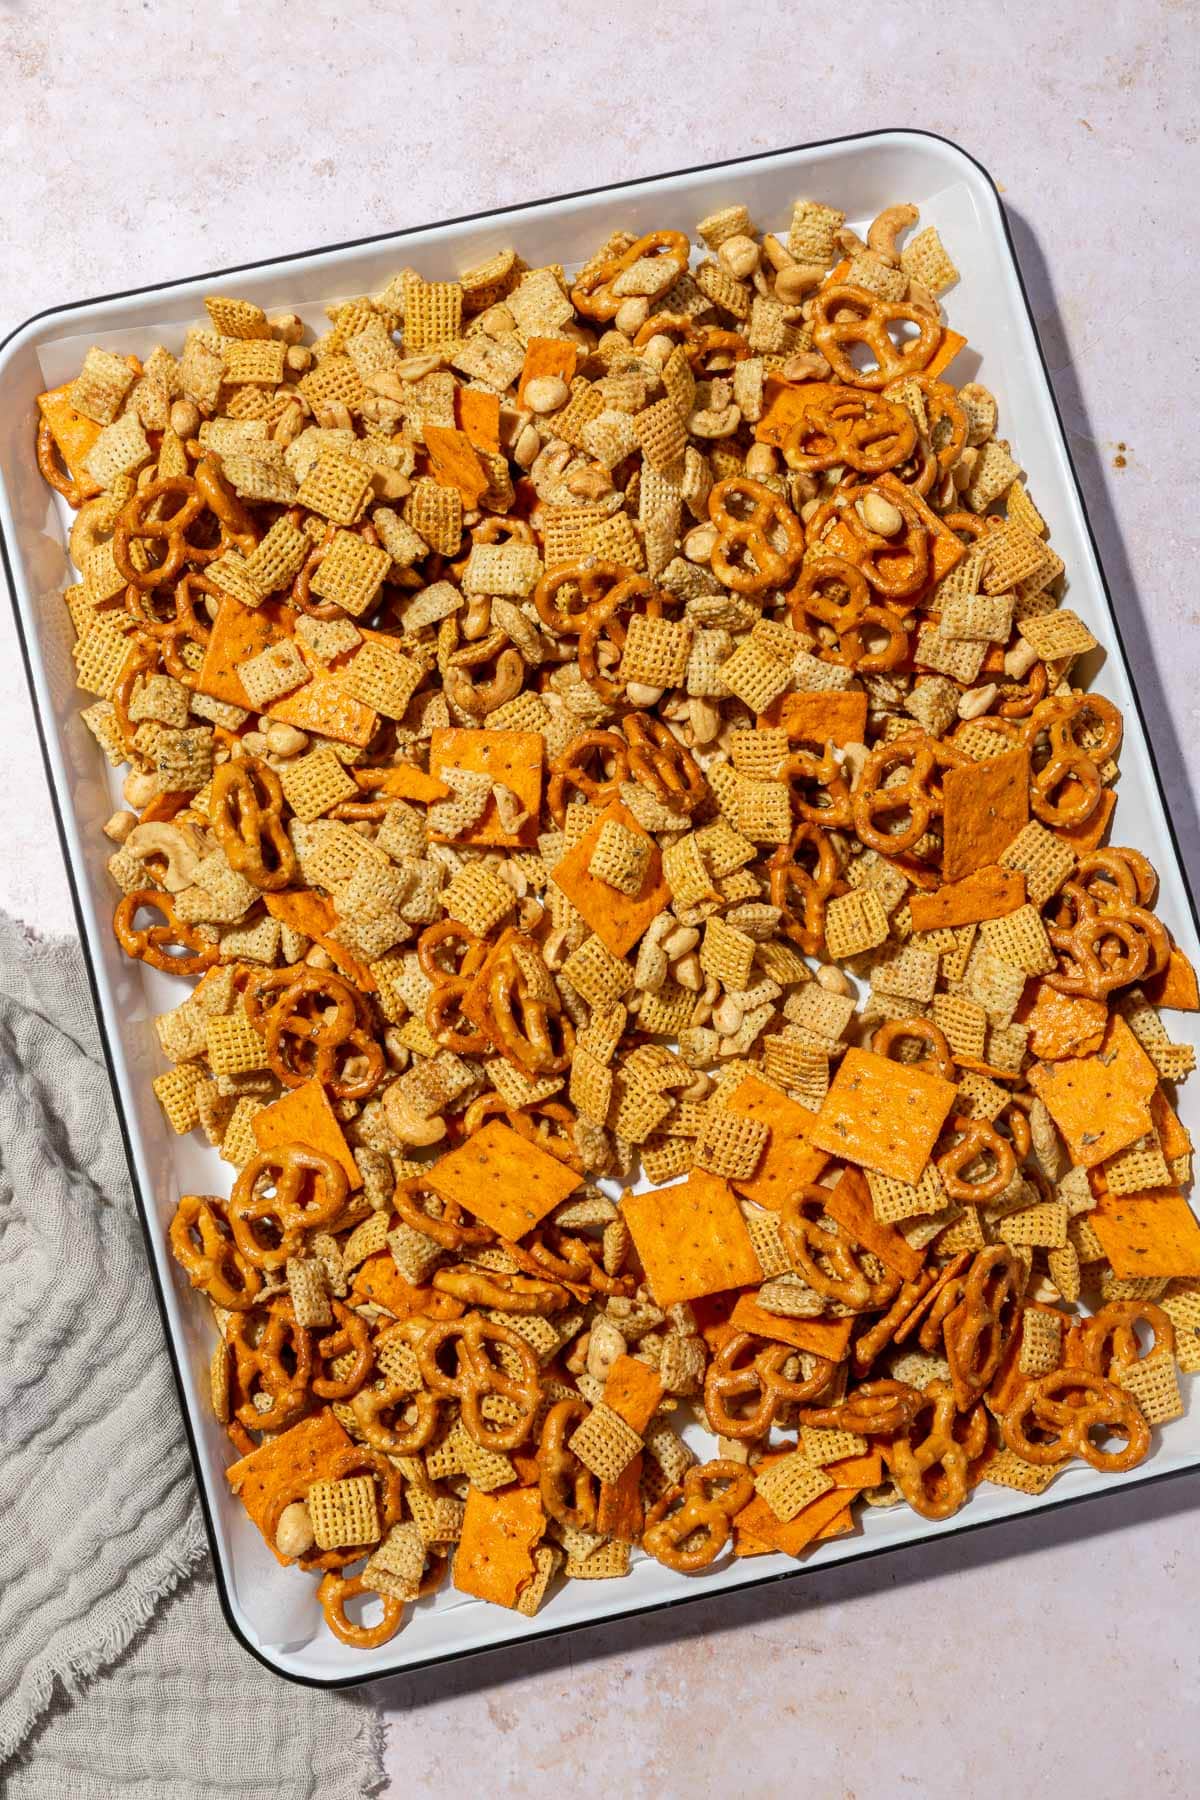 A white sheet pan with gluten-free chex mix on it after baking in the oven.